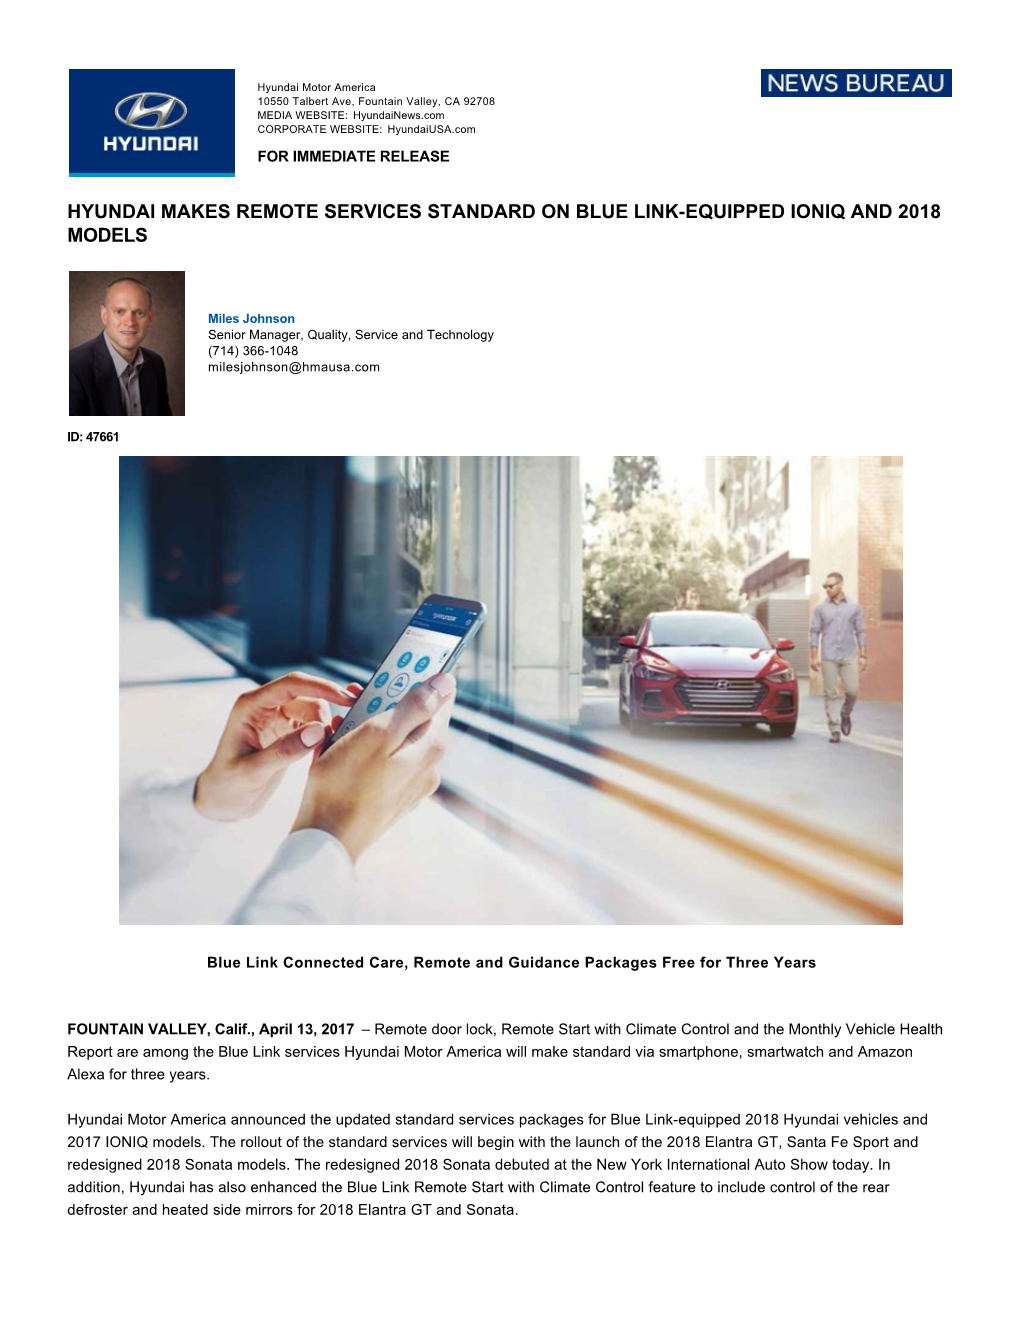 Hyundai Makes Remote Services Standard on Blue Link­Equipped Ioniq and 2018 Models